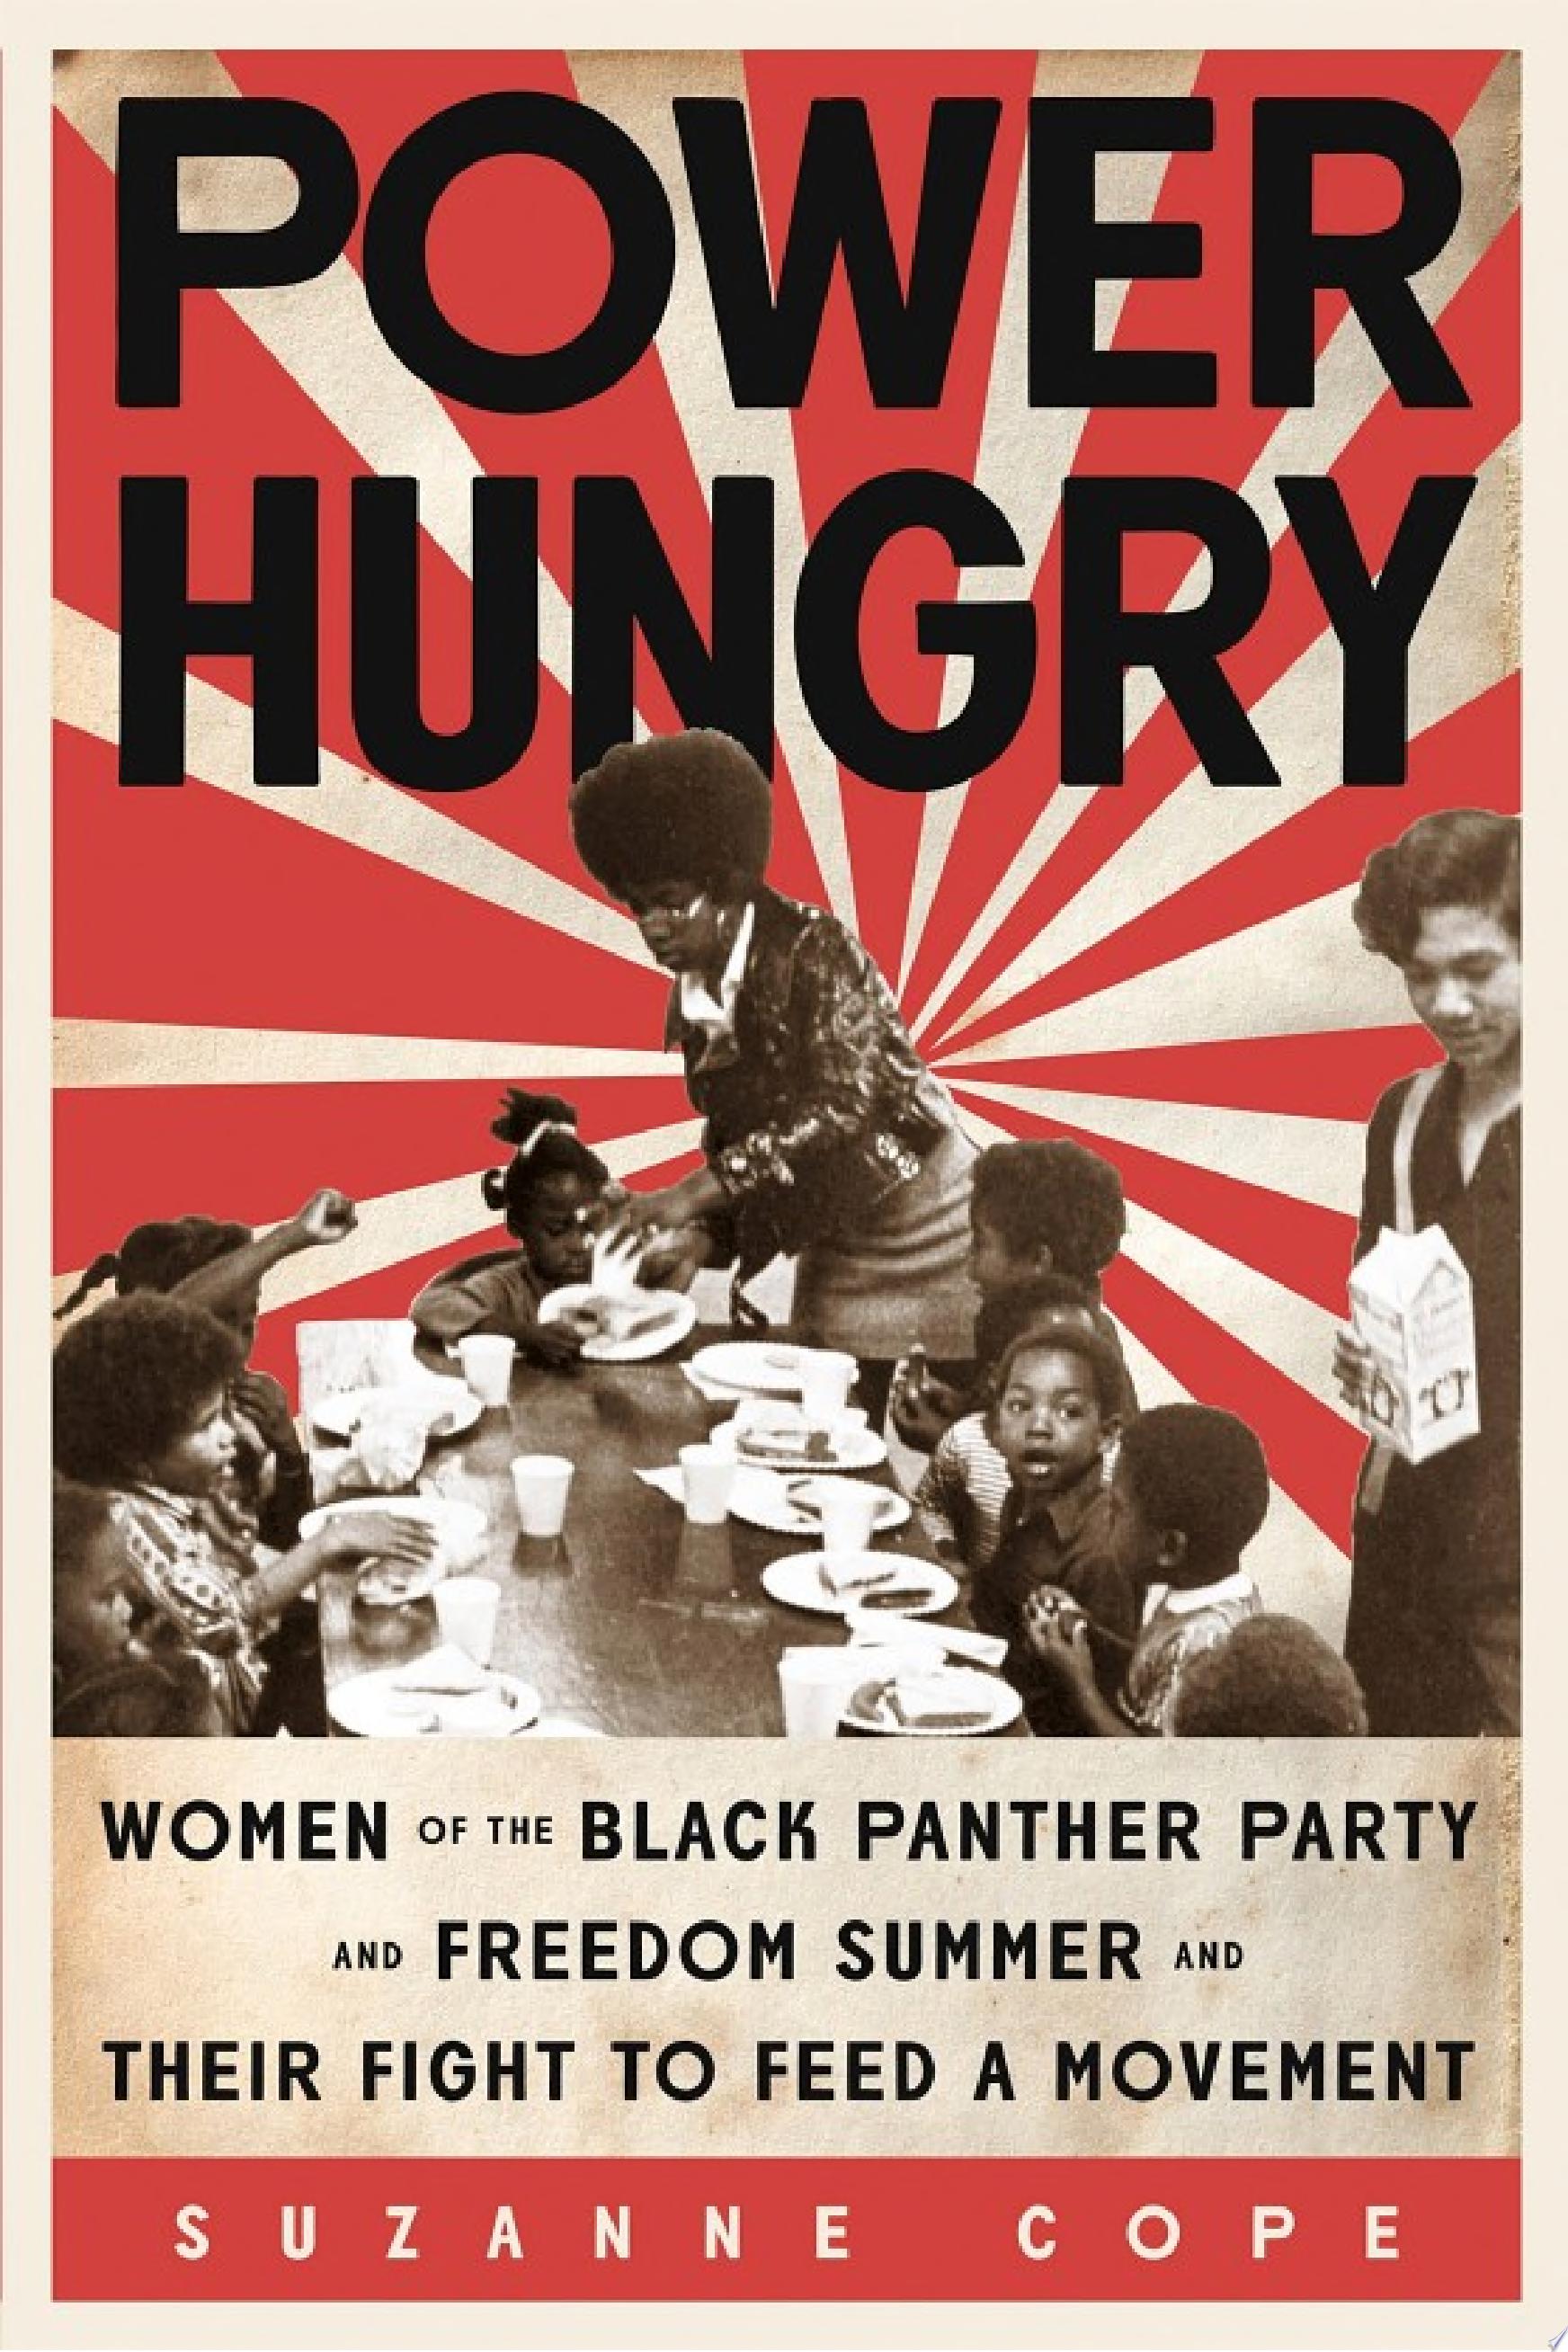 Image for "Power Hungry"